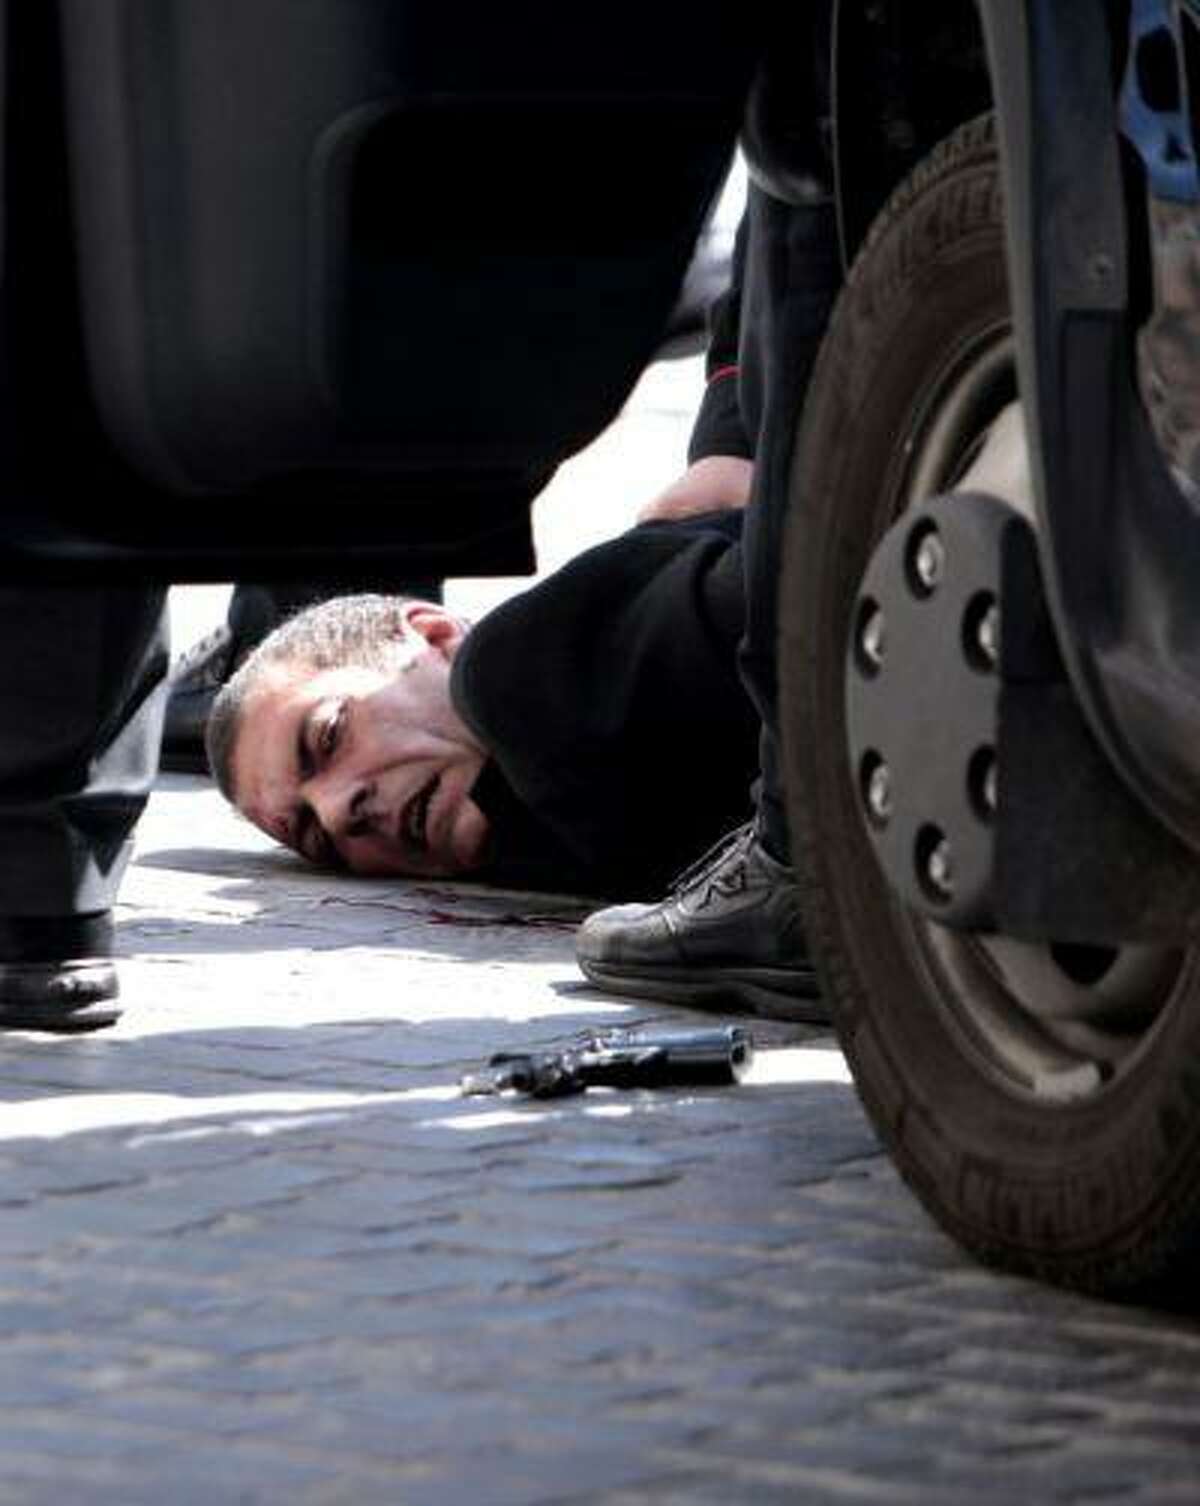 A man believed to be the assailant lies on the ground detained by police after a shootout outside the Chigi Premier's office, in Rome, Sunday, April 28, 2013. Reports say two paramilitary police officers were shot and wounded outside the Italian premier's office as the new leader Enrico Letta was sworn in about a kilometer (half-mile) away. It was unclear if there was any connection between the events. (AP Photo/Mauro Scrobogna, Lapresse) ITALY OUT